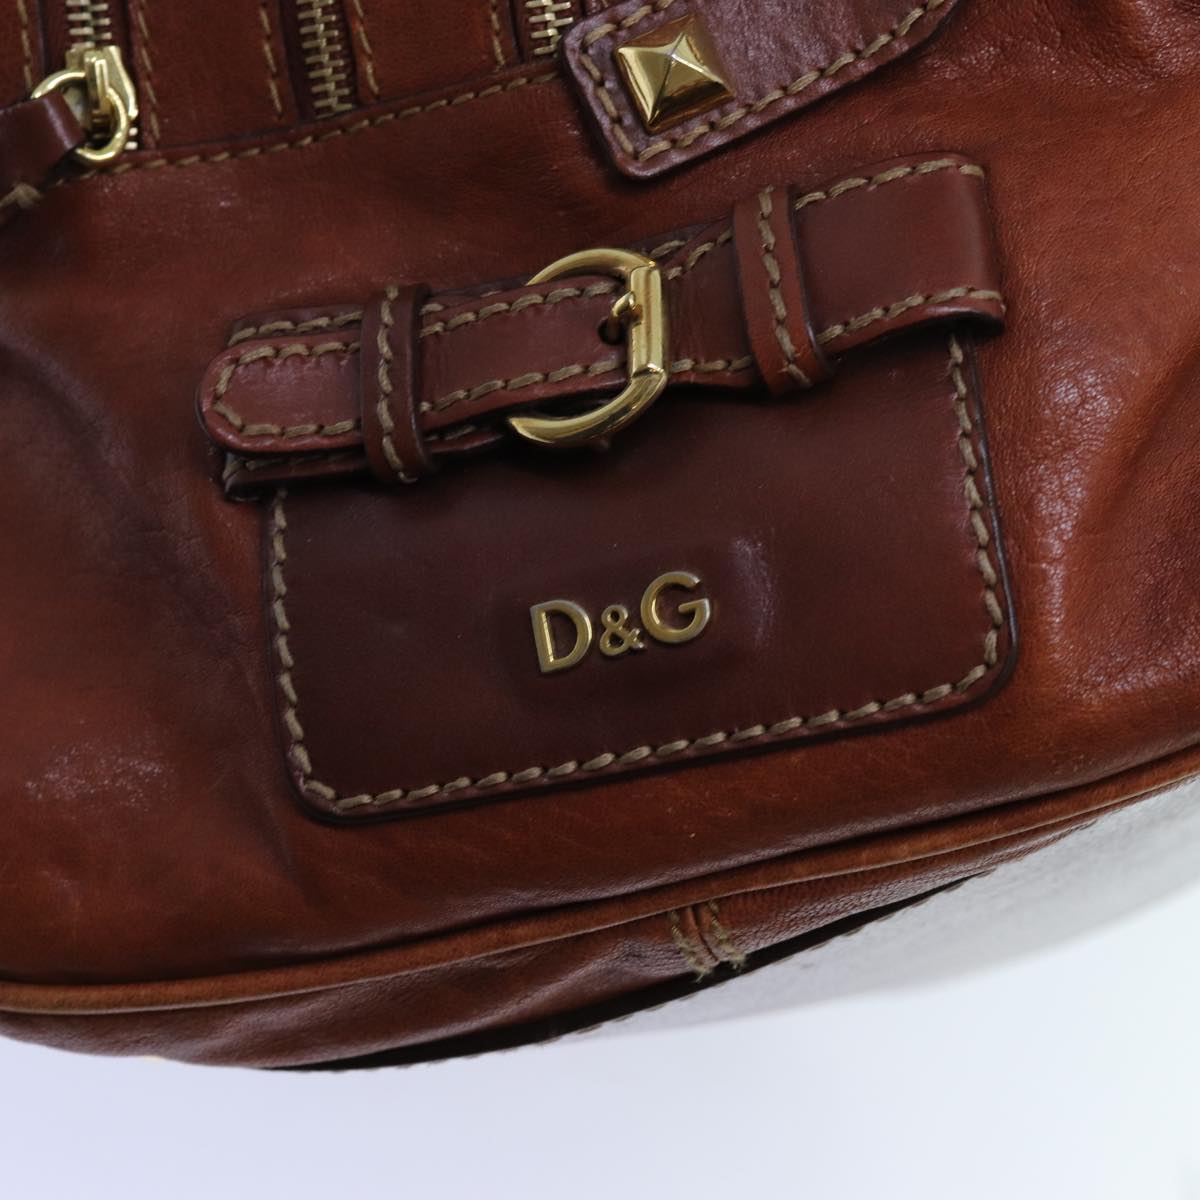 DOLCE&GABBANA Hand Bag Leather Brown Auth 70819